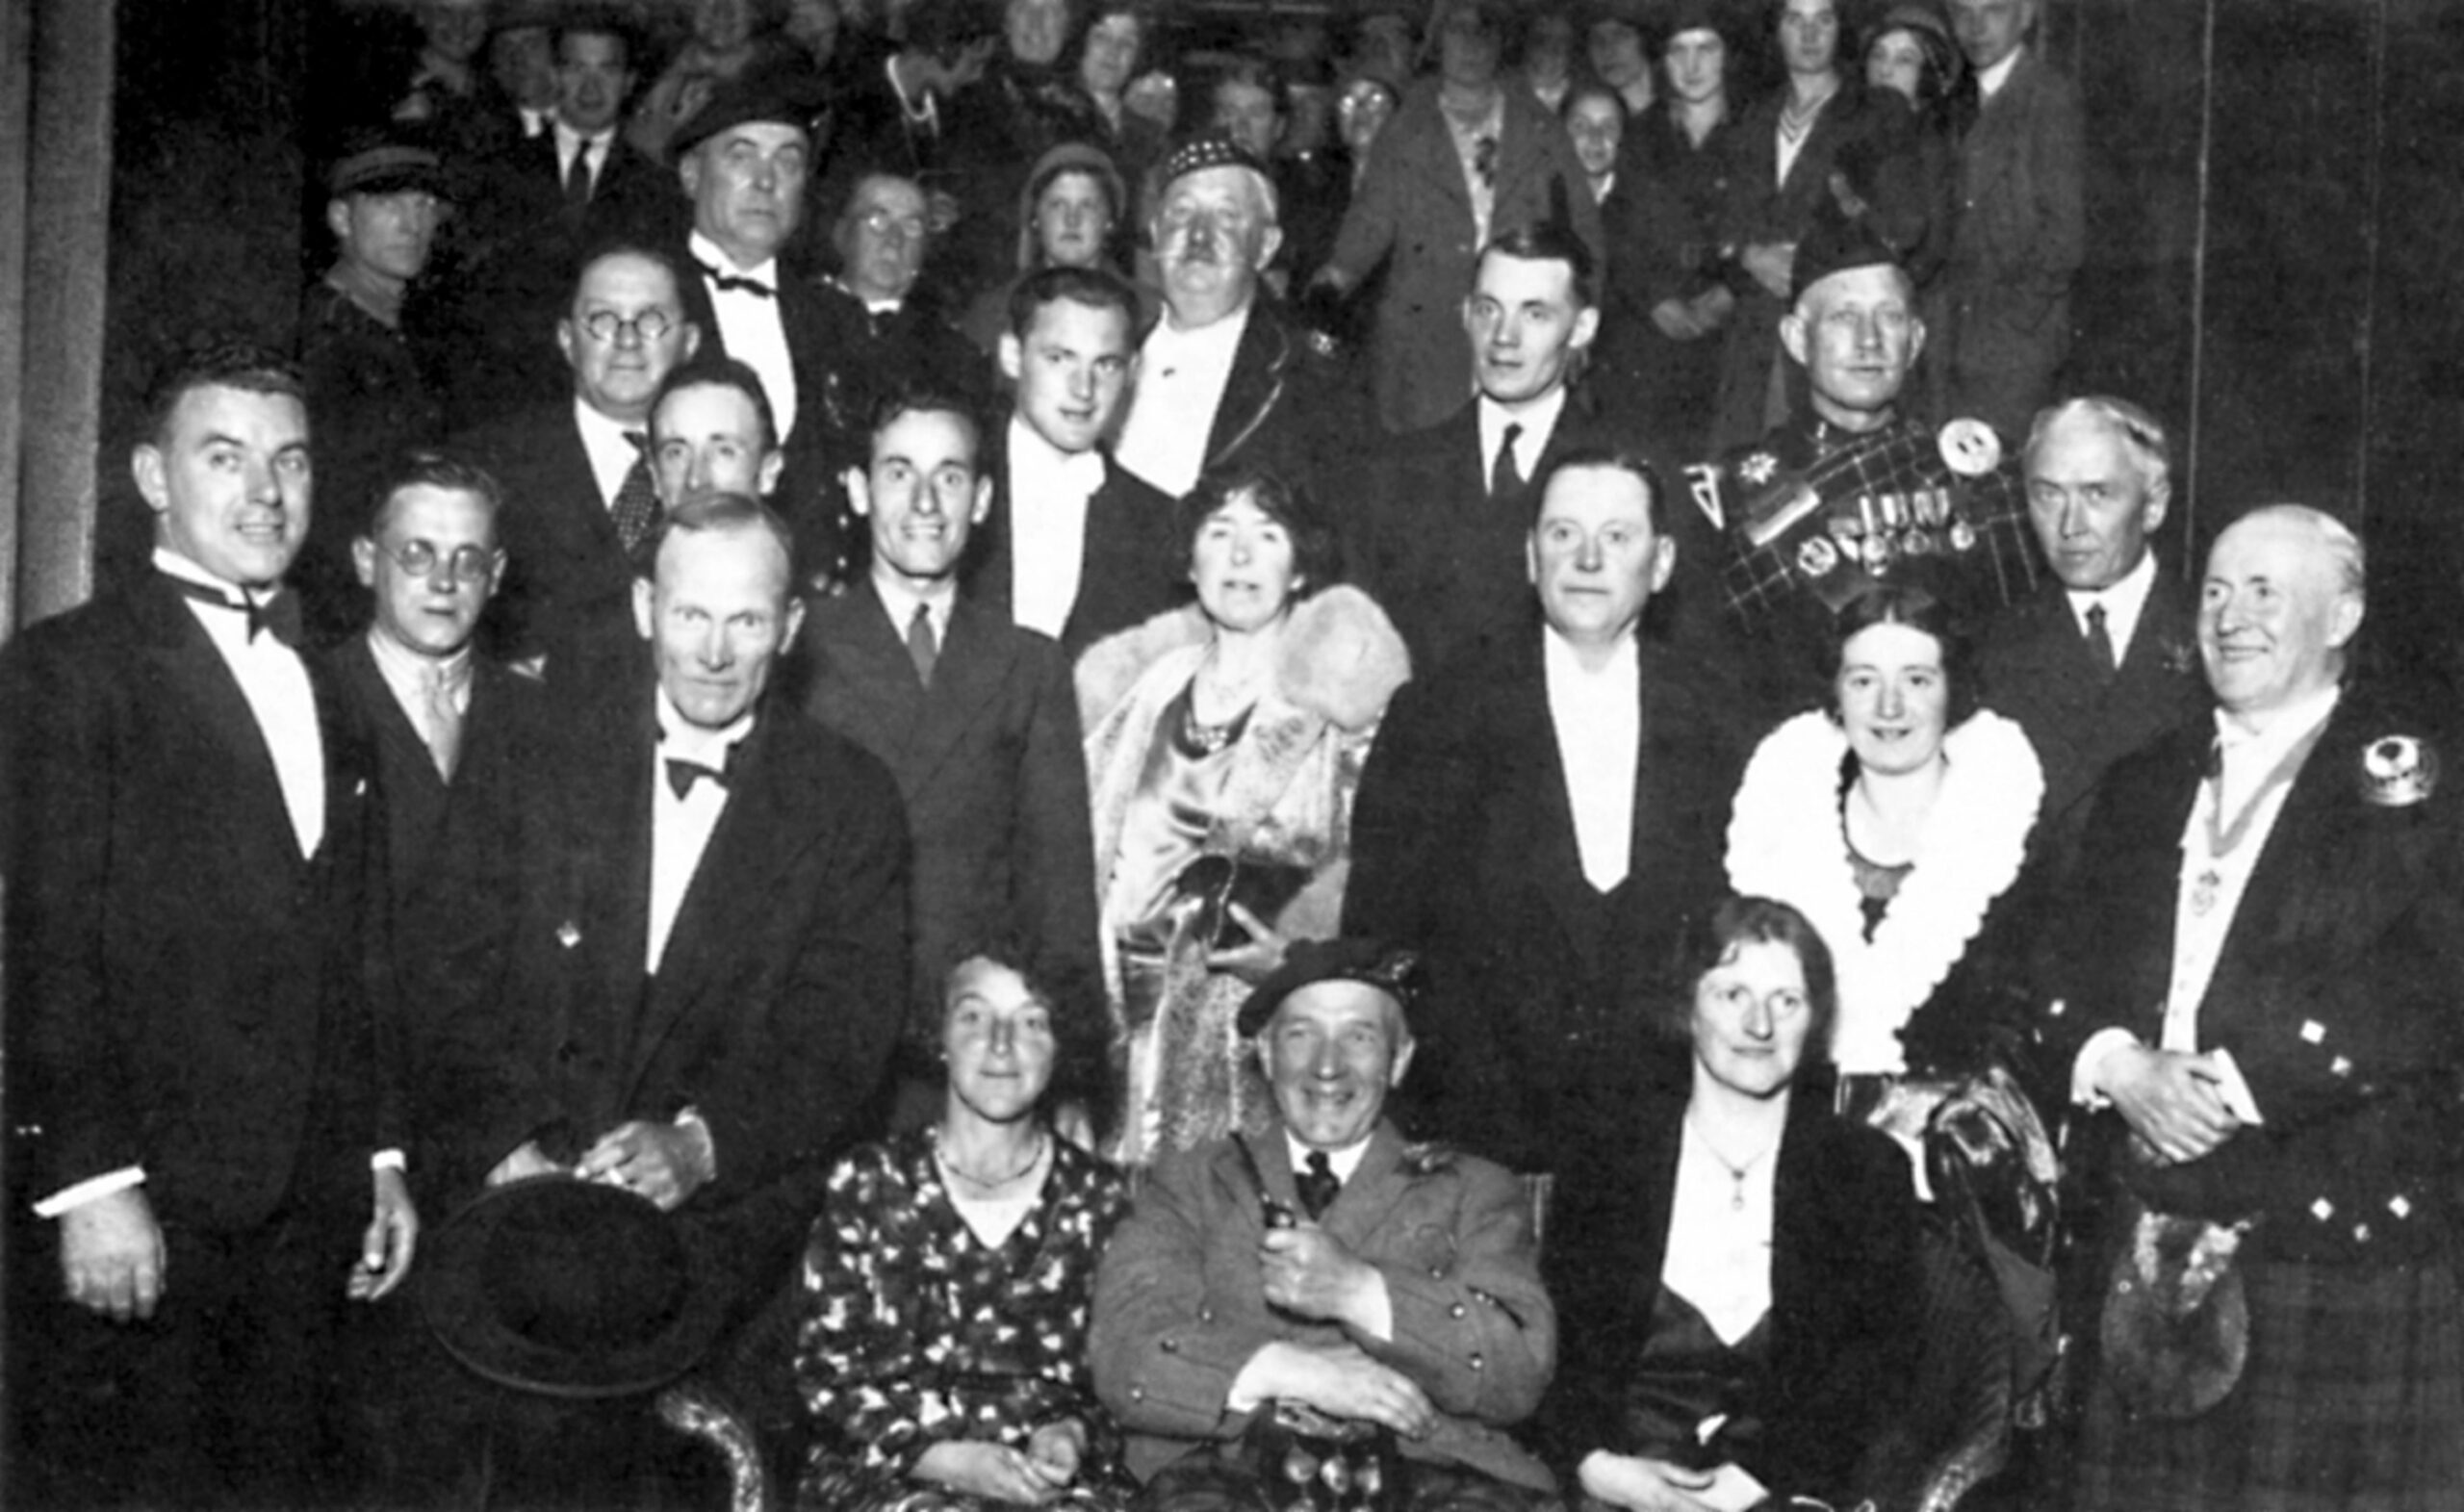 Golden Jubilee concert in Picture House on Arbroath High Street in 1932.